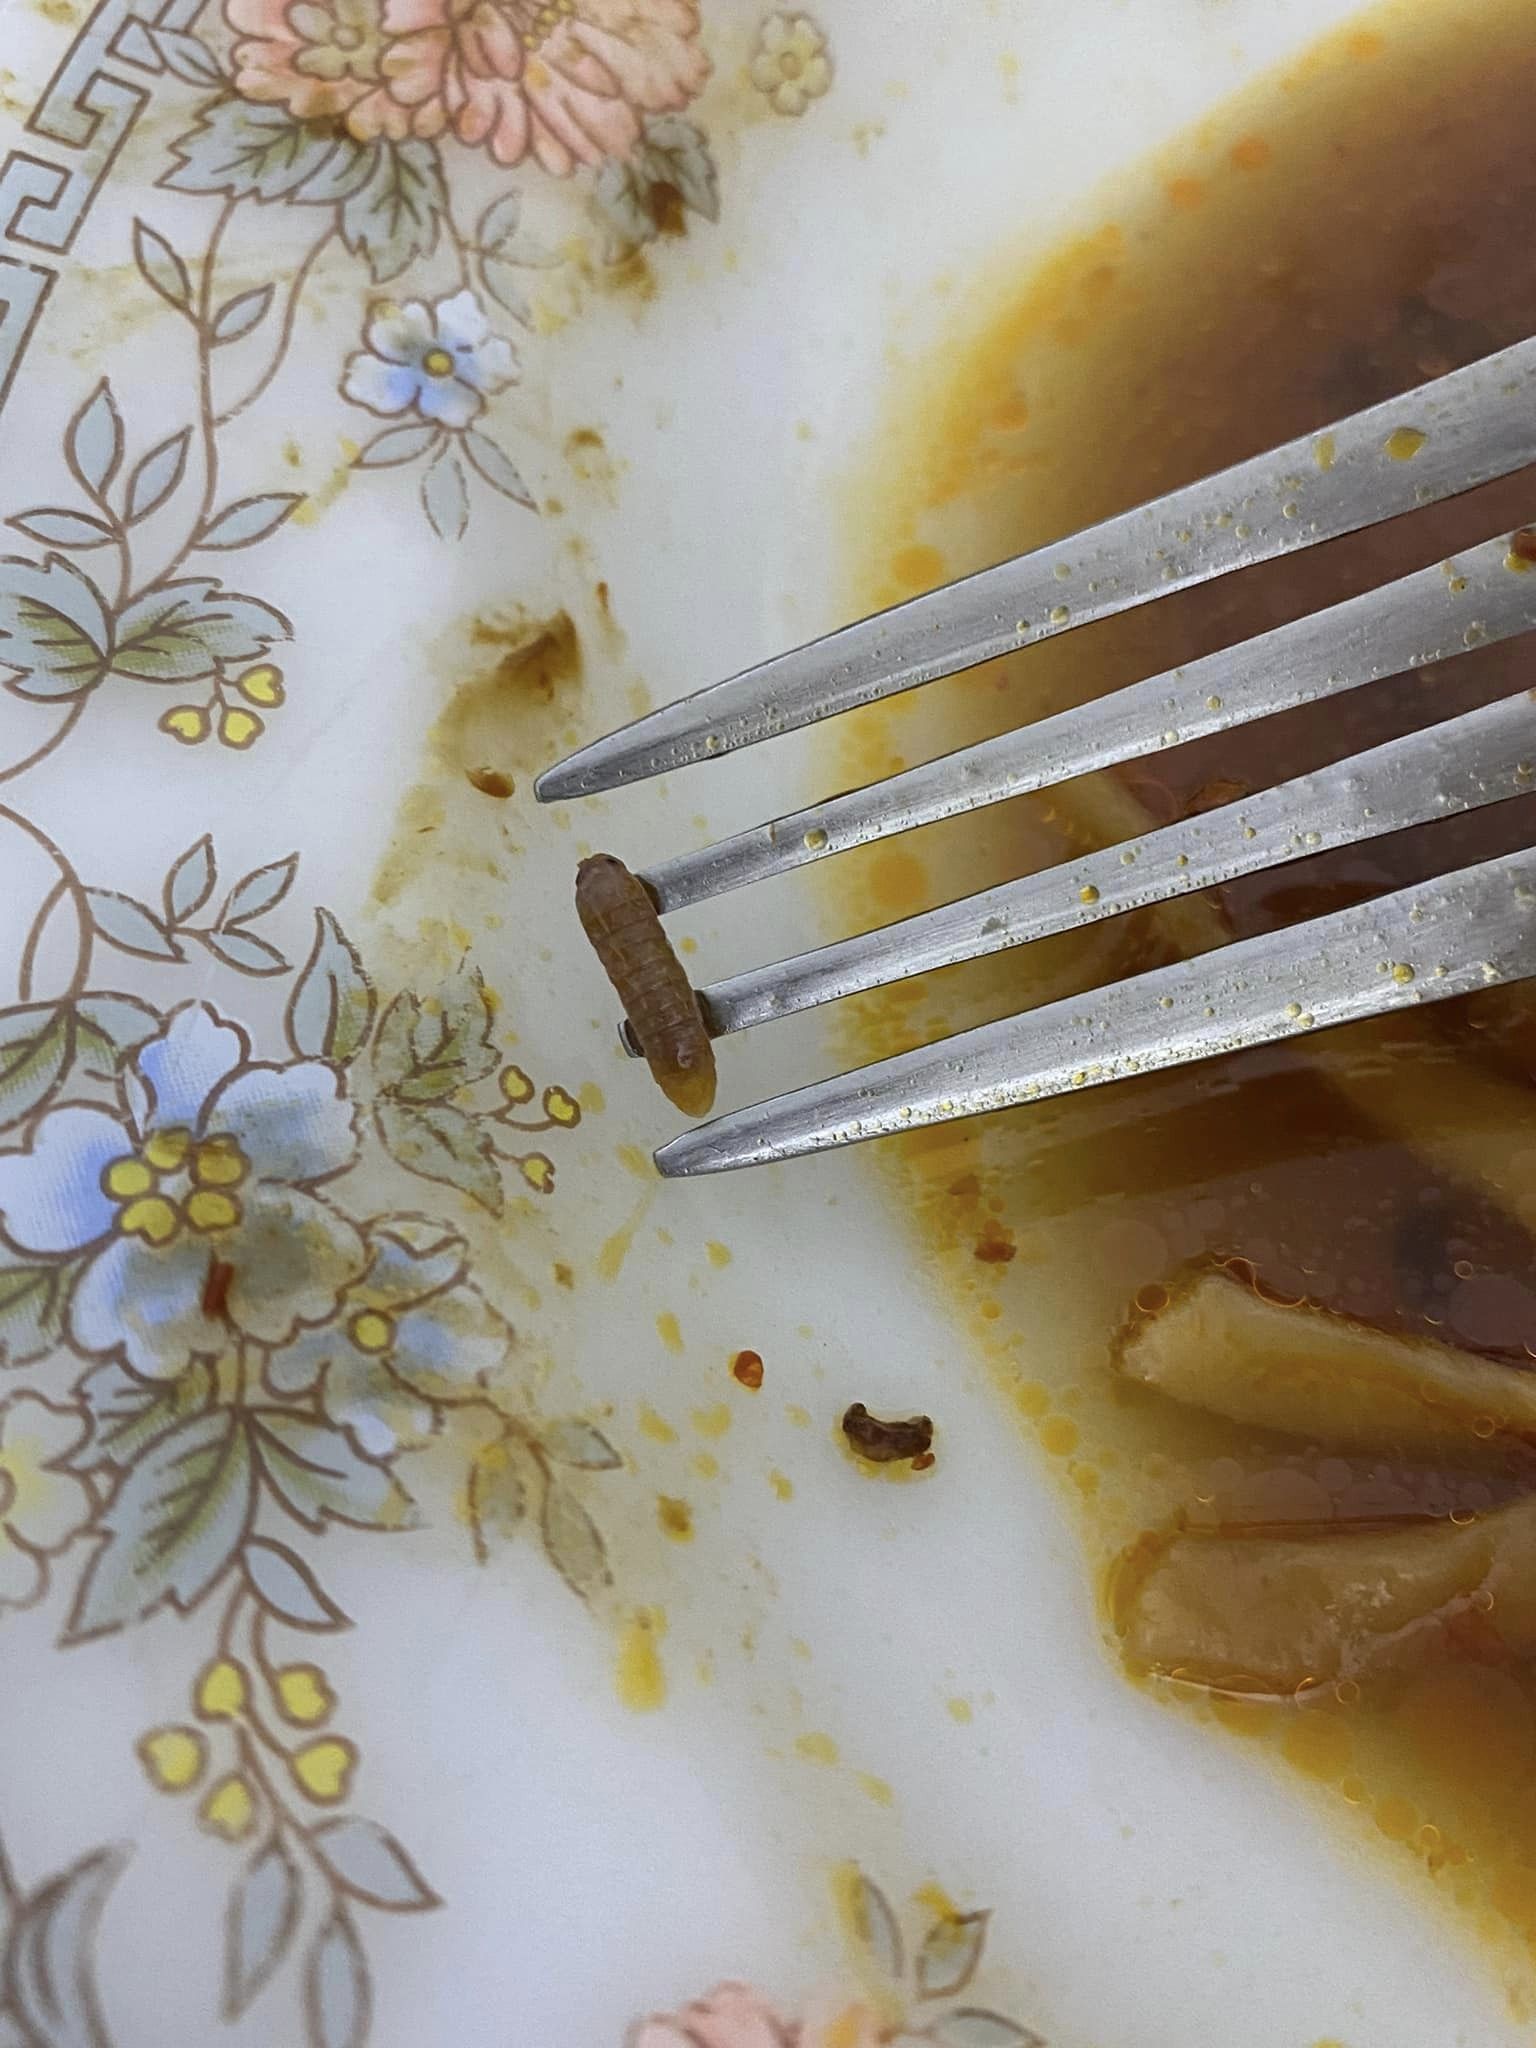 A tiny worm found in a meal